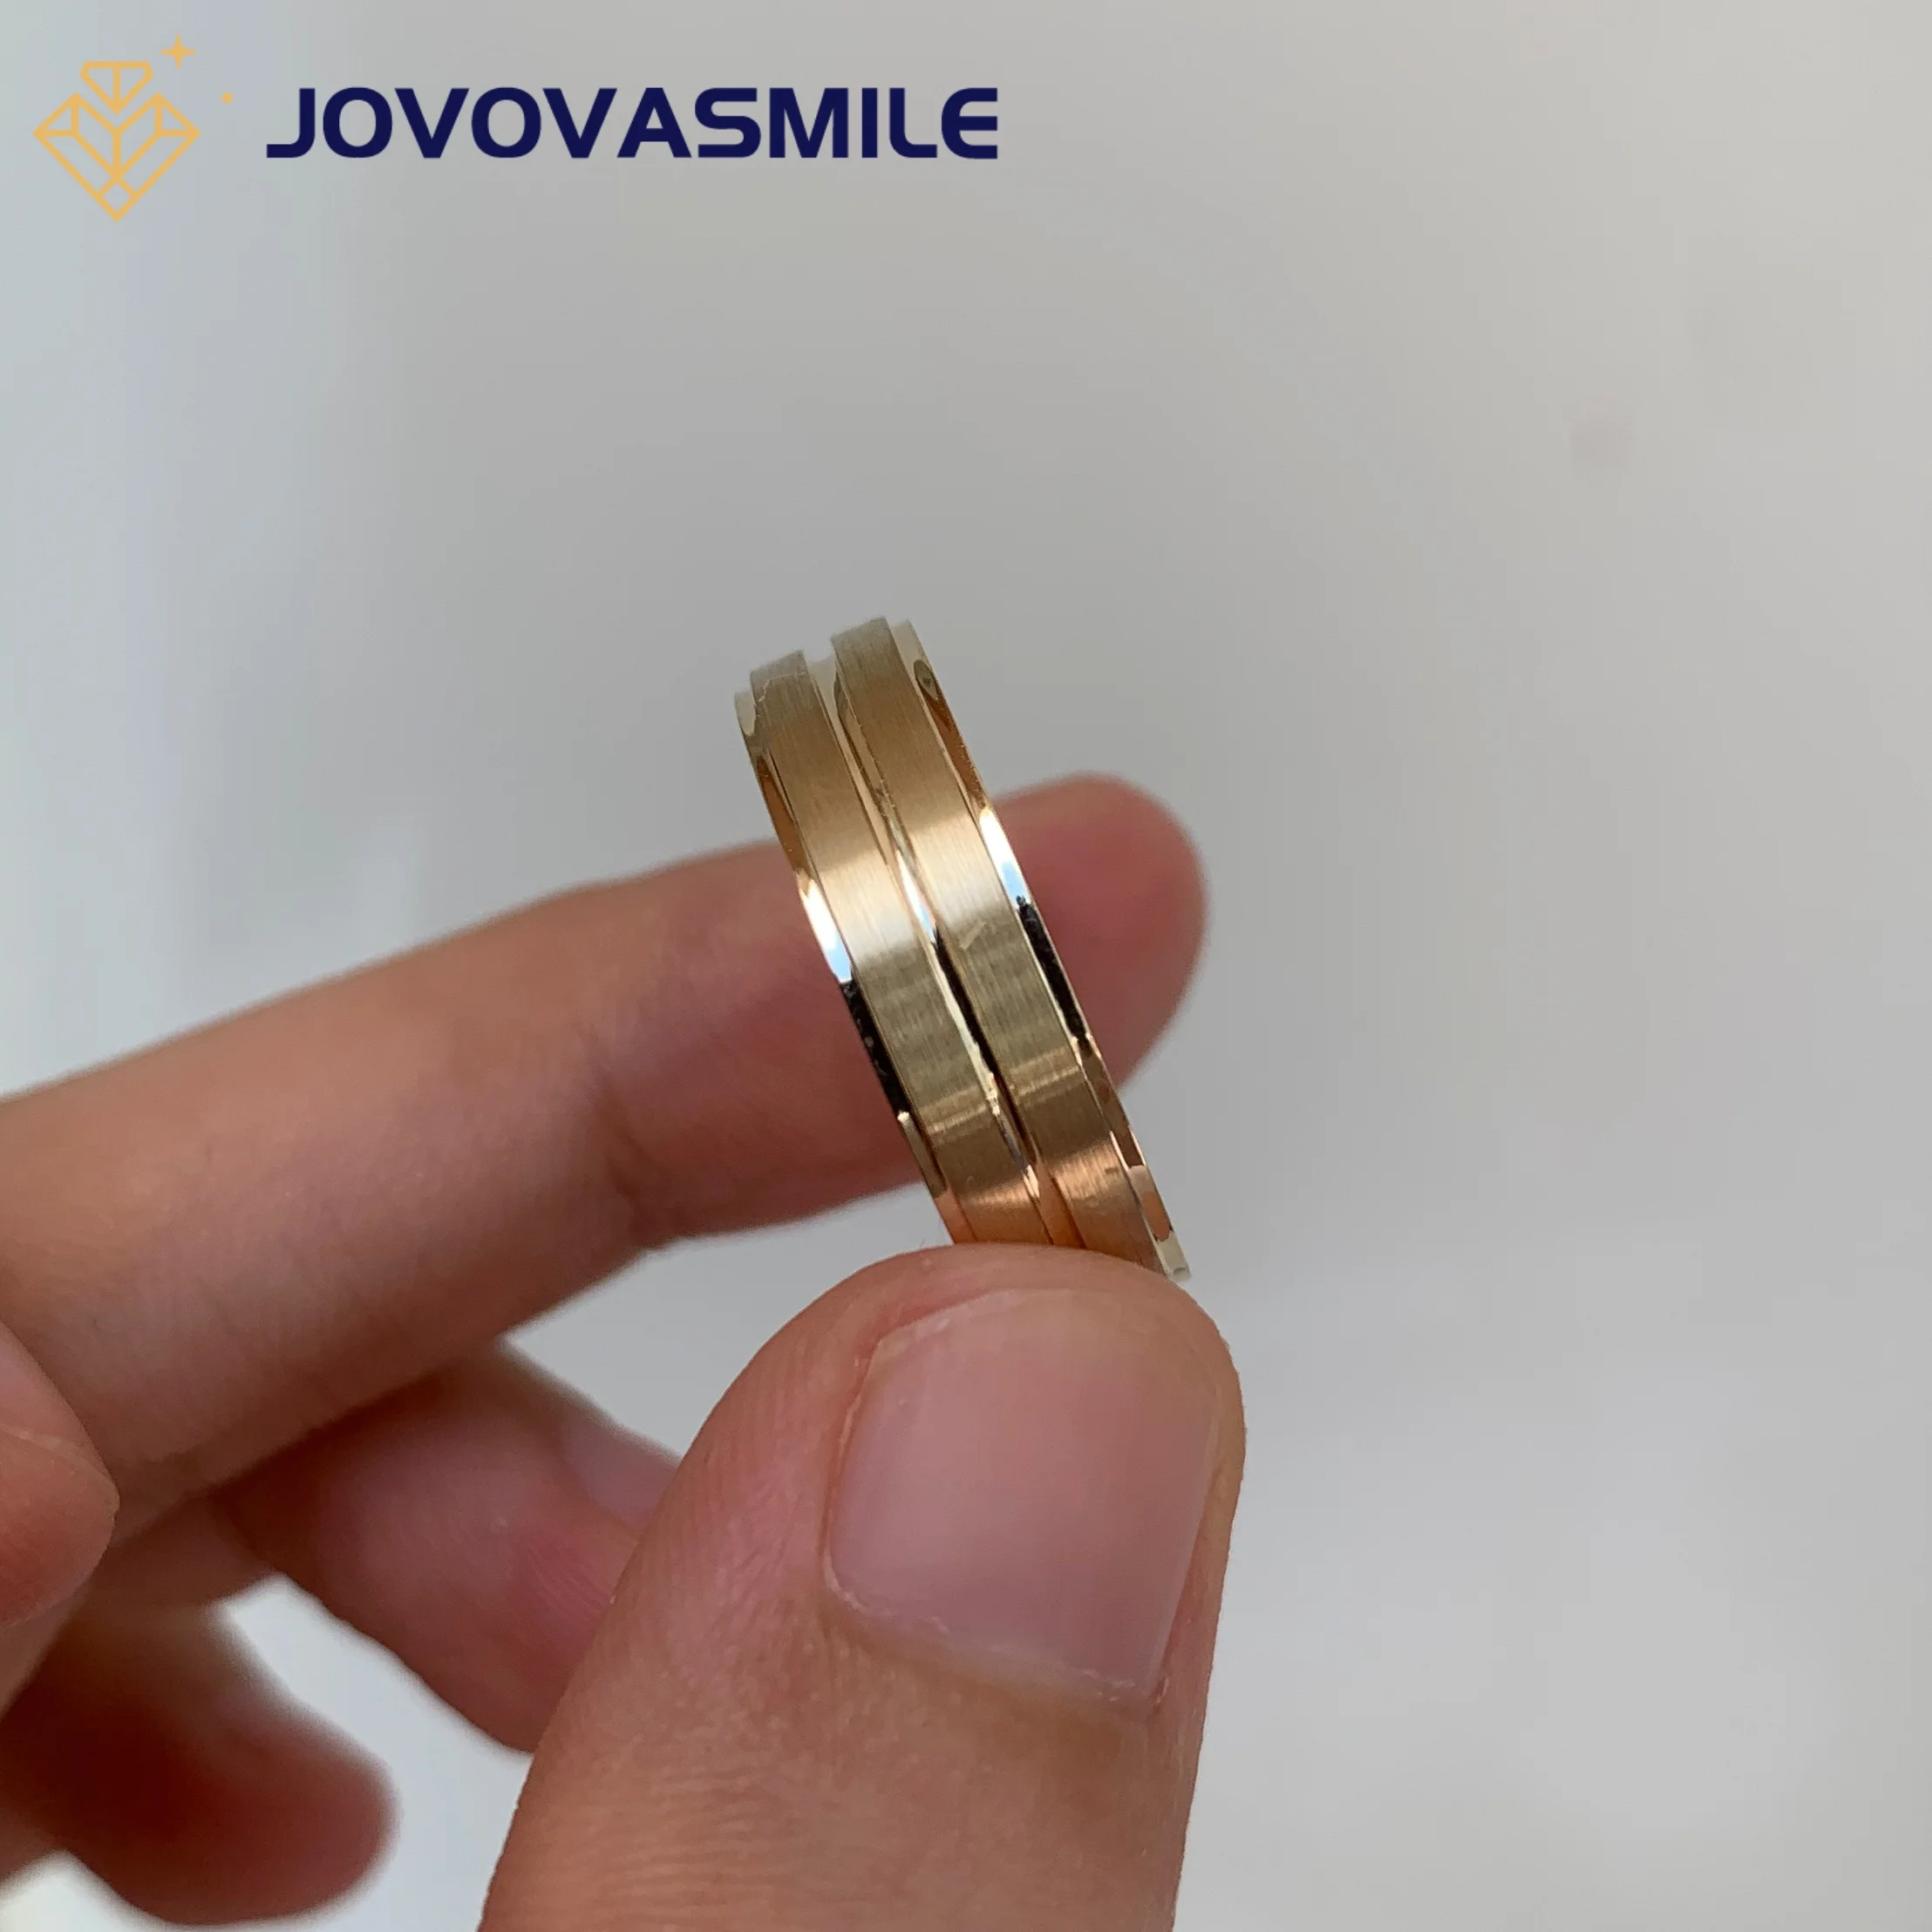 JOVOVASMILE 9K 14K 18K Yellow Gold Man Wedding Engagement Rings Bridegroom Jewelry with Certificate boutonniere and wrist corsage european and american wedding accessories imitation flower bridegroom bride skirt flower sisters